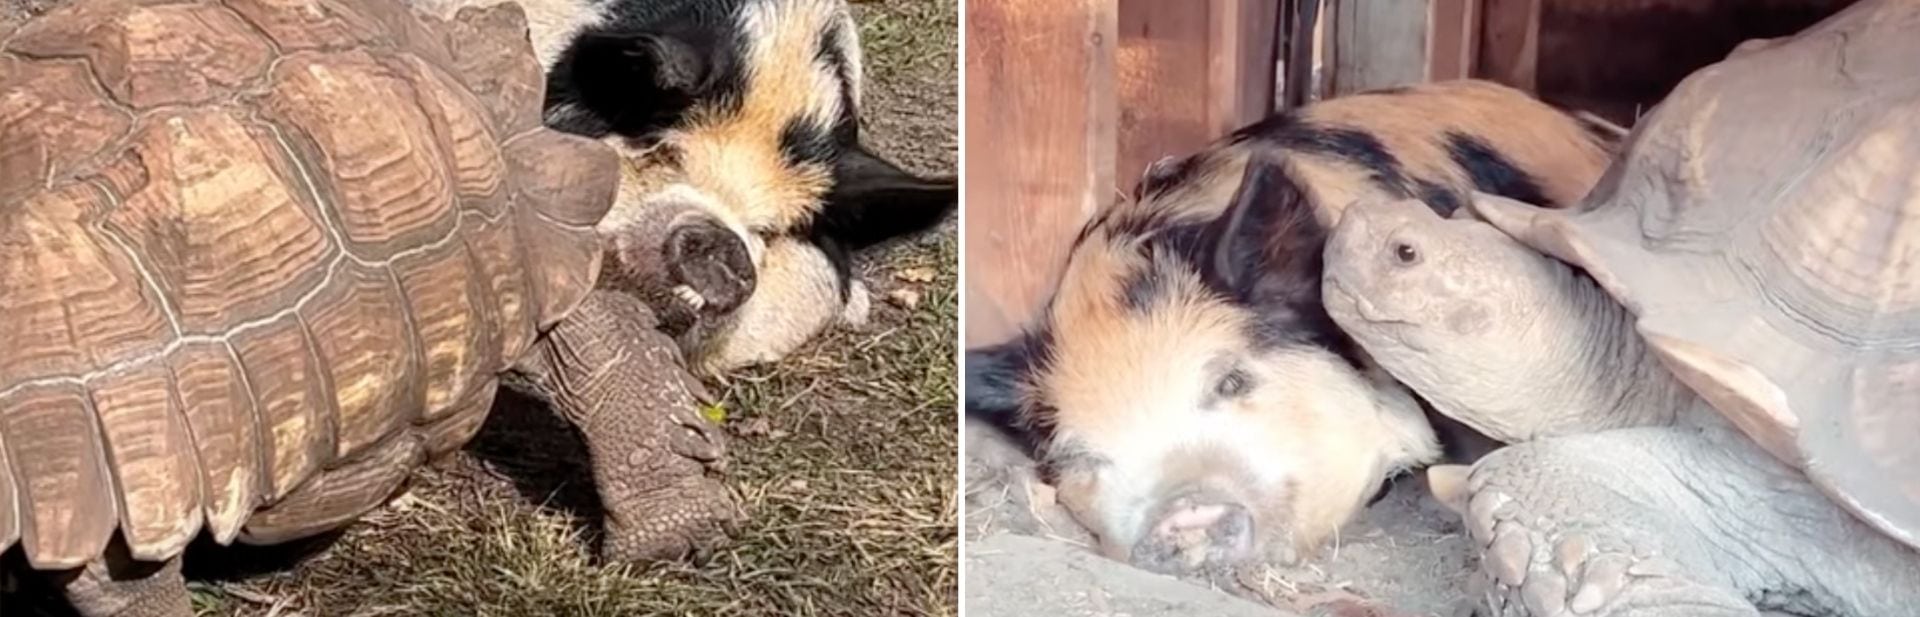 Grumpy Tortoise Turns Cuddly When a Piglet Steps Into His Life